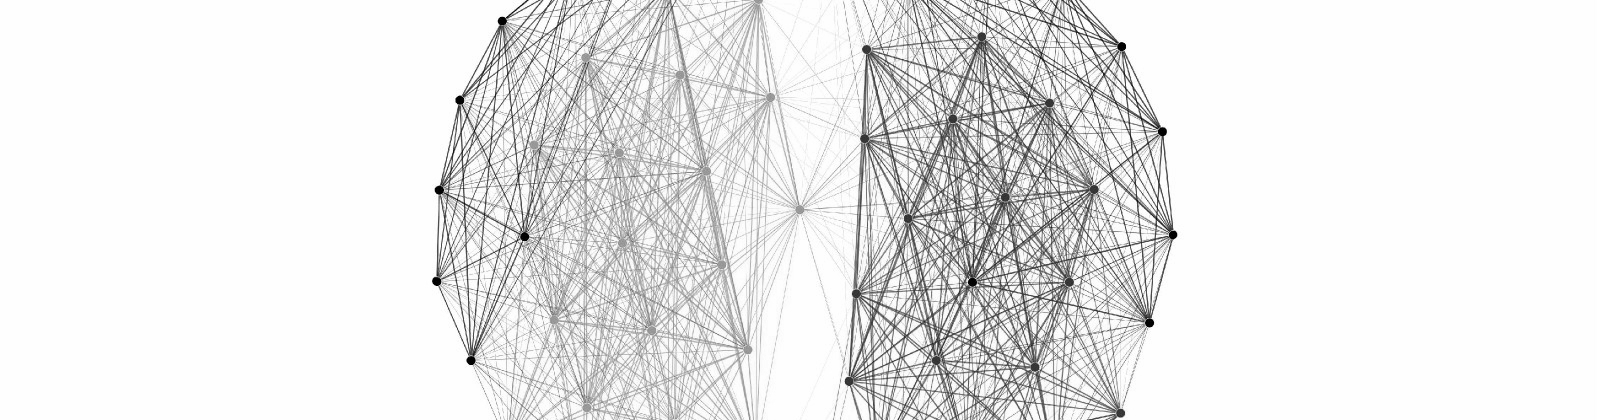 Plotting networks using Python and Gephi